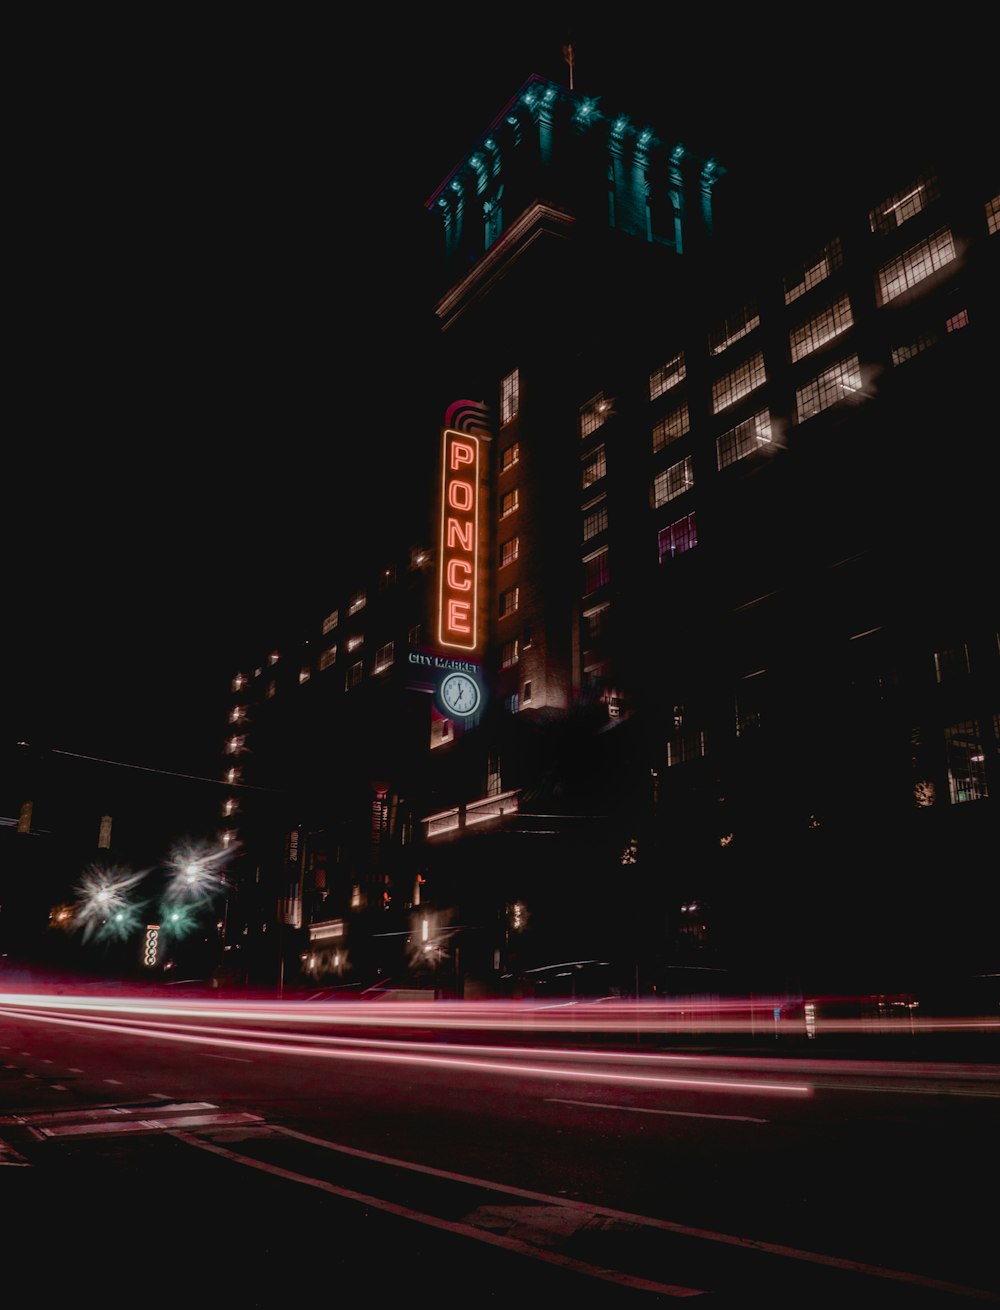 time lapse photography of city street during night time